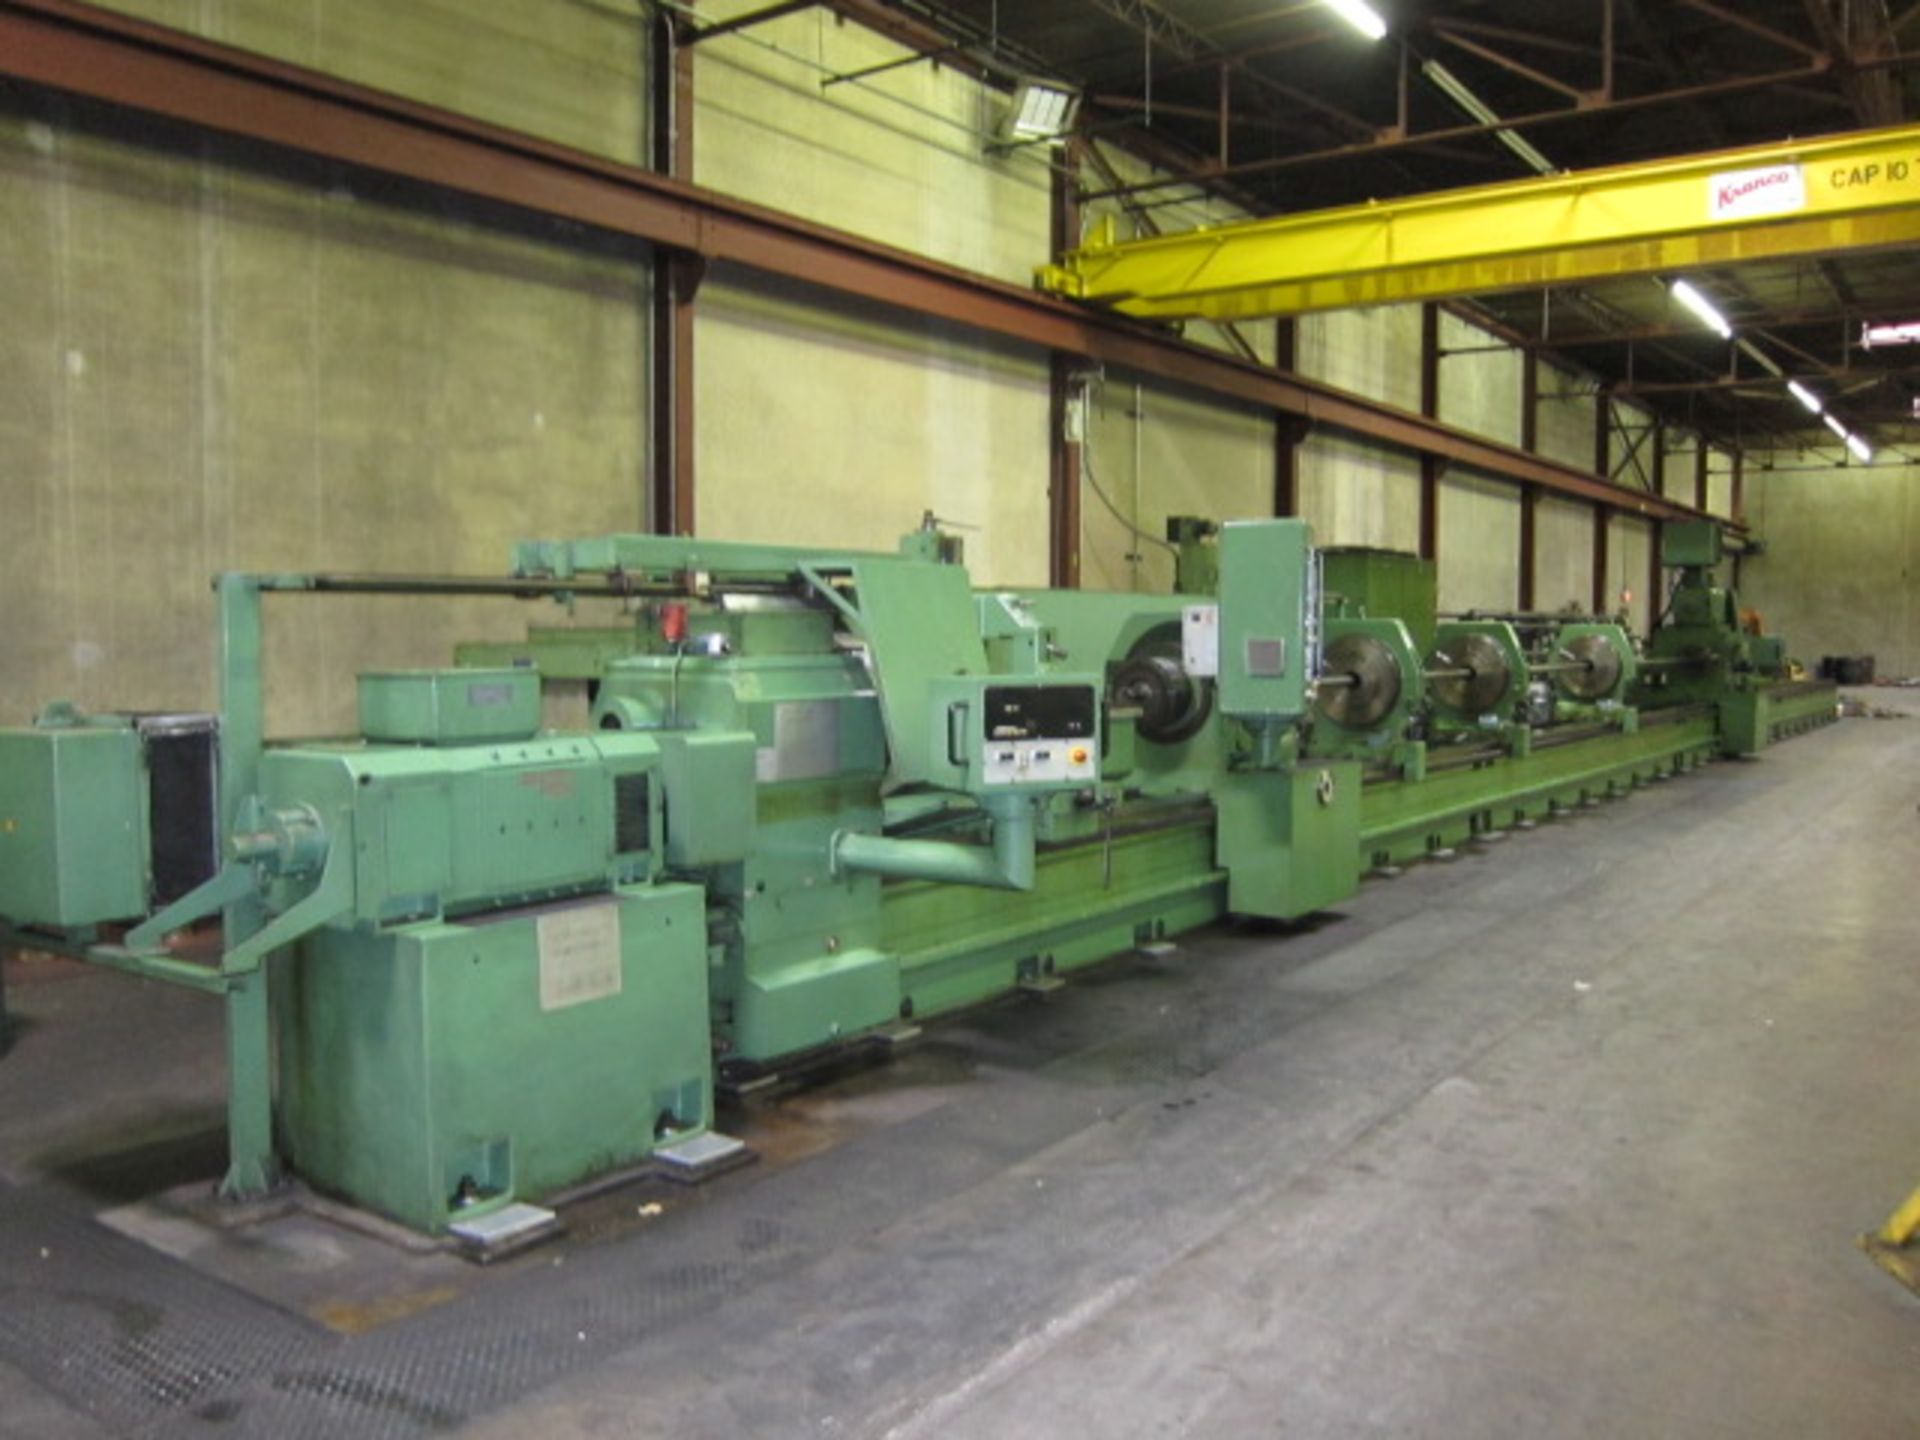 COUNTER ROTATING DEEP HOLE BORING MACHINE, WOHLENBERG MDL. PB2-1000 X 11M, new 1995, 39.37” sw. over